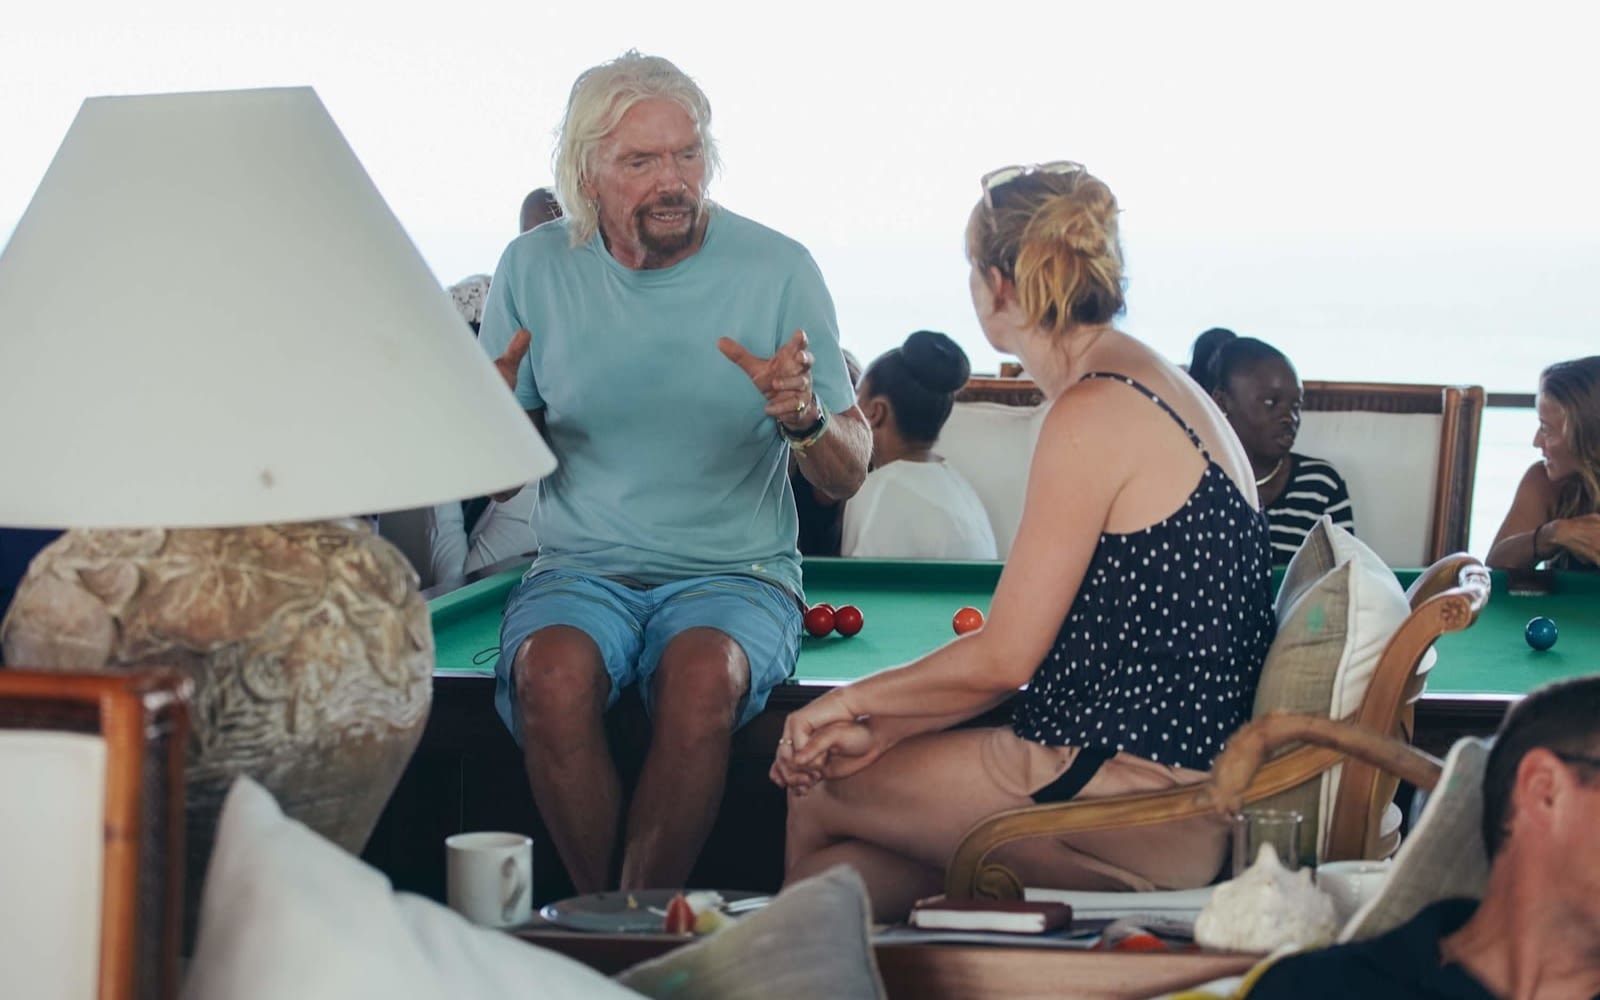 Richard Branson wearing shorts talking to a woman whilst sat on a pool table